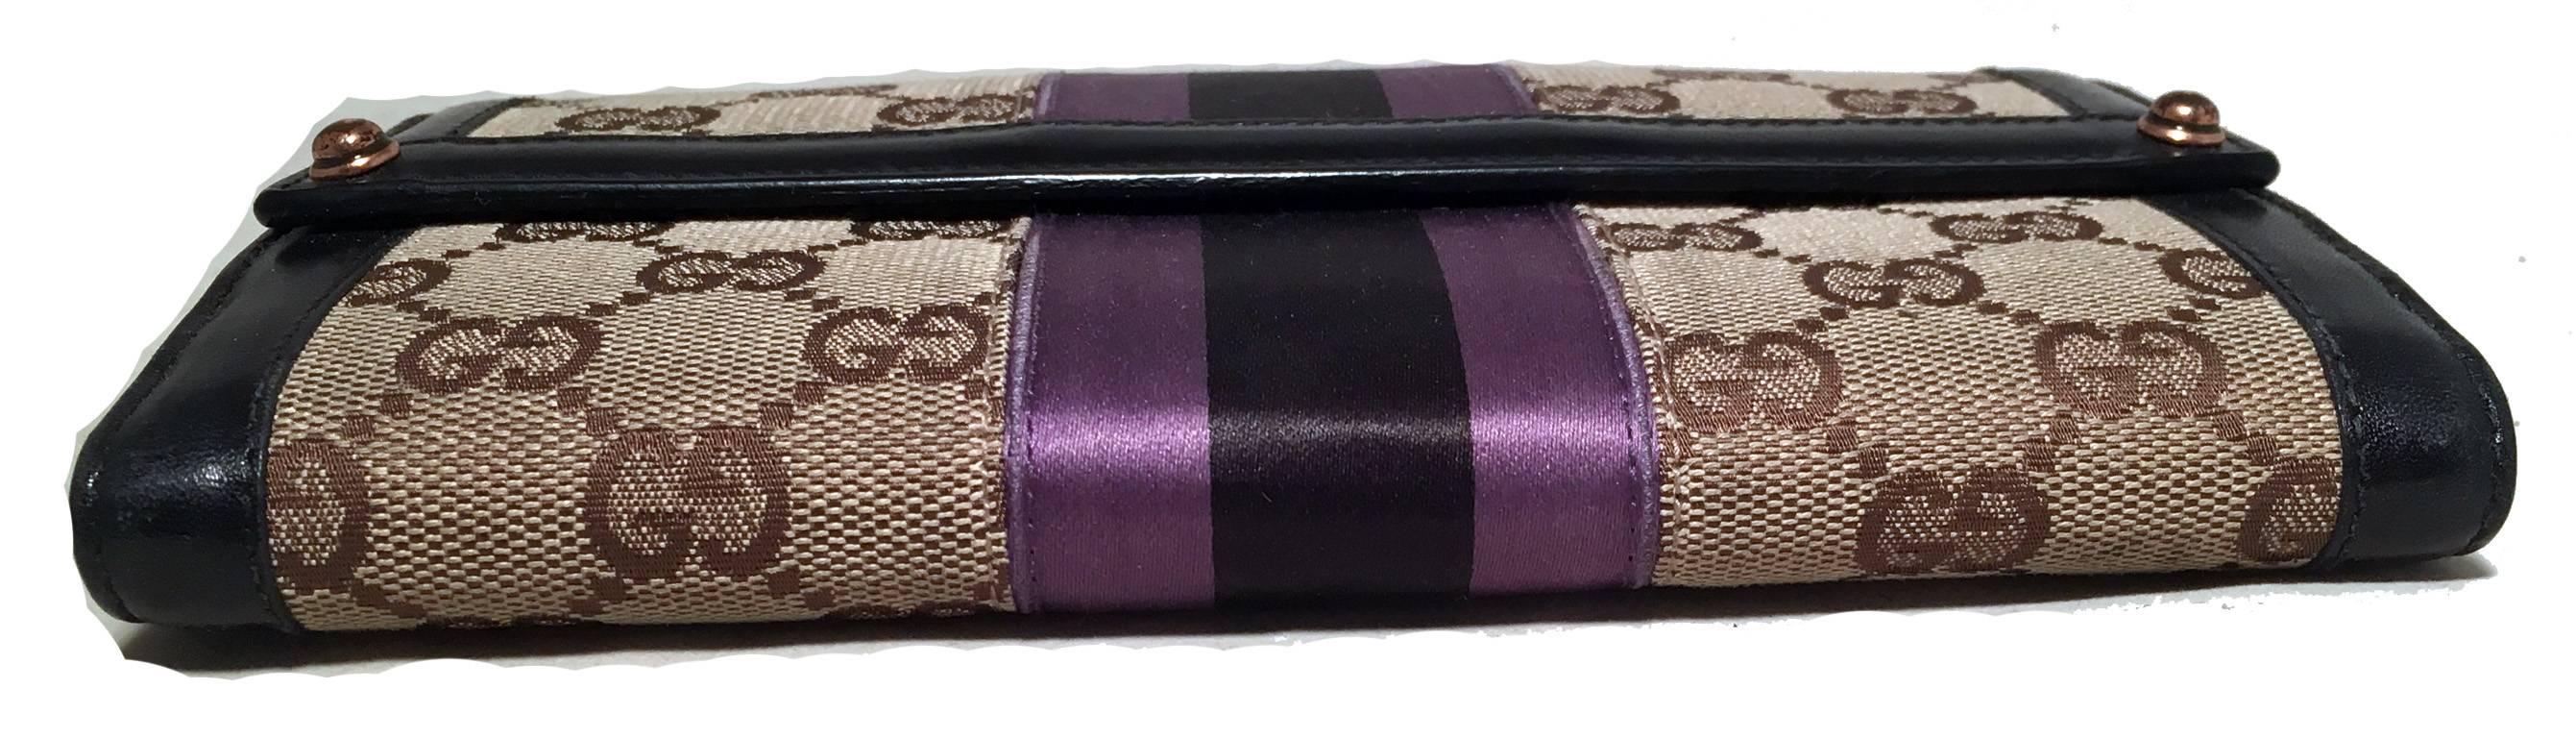 Women's Gucci Monogram Black and Purple Leather and Satin Wallet 